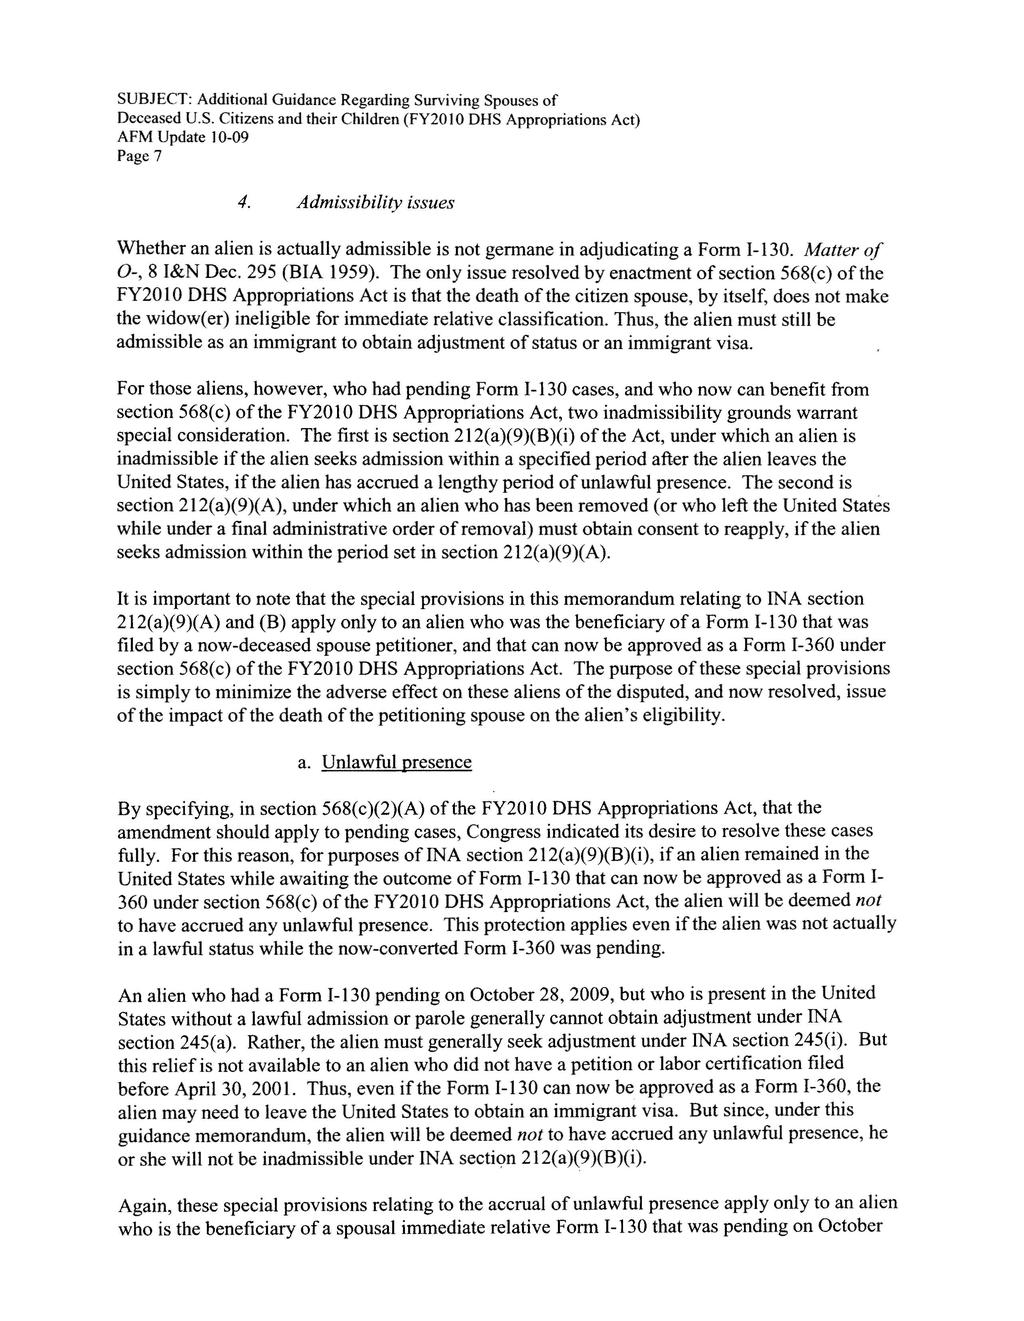 SUBJECT: Additional Guidance Regarding Surviving Spouses of Deceased U.S. Citizens and their Children (FY2010 DHS Appropriations Act) AFM Update 10-09 Page 7 4.